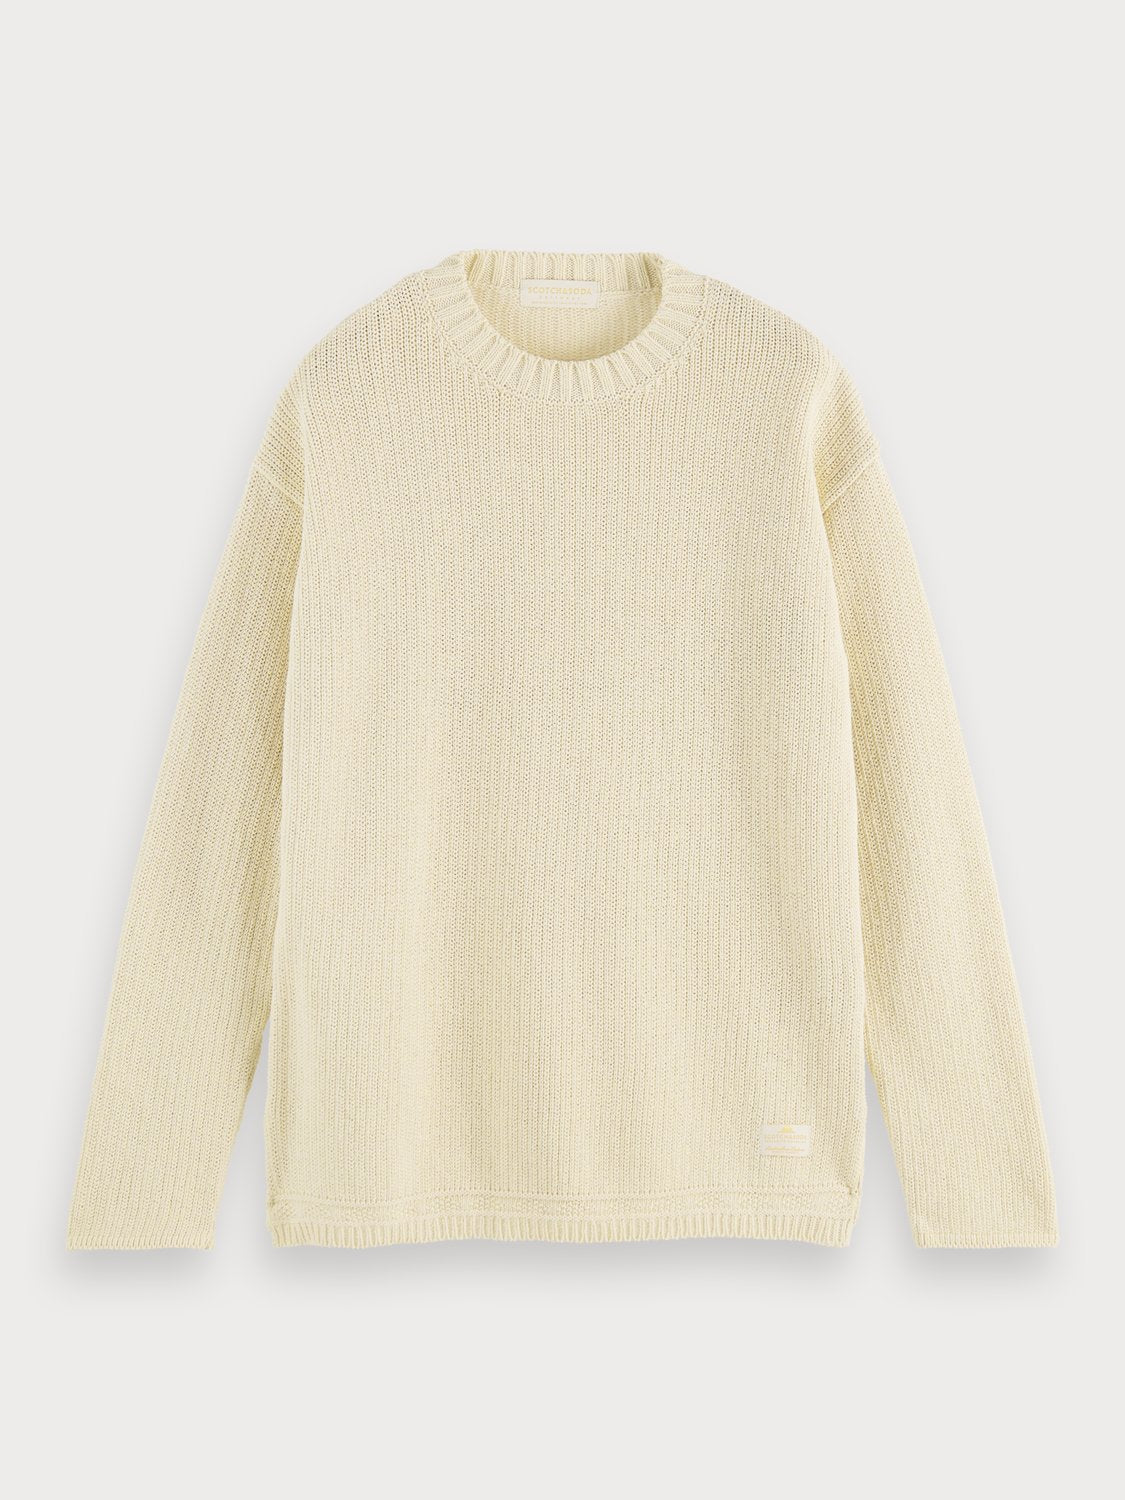 Scotch and Soda  Structured knit recycled cotton blend sweater in